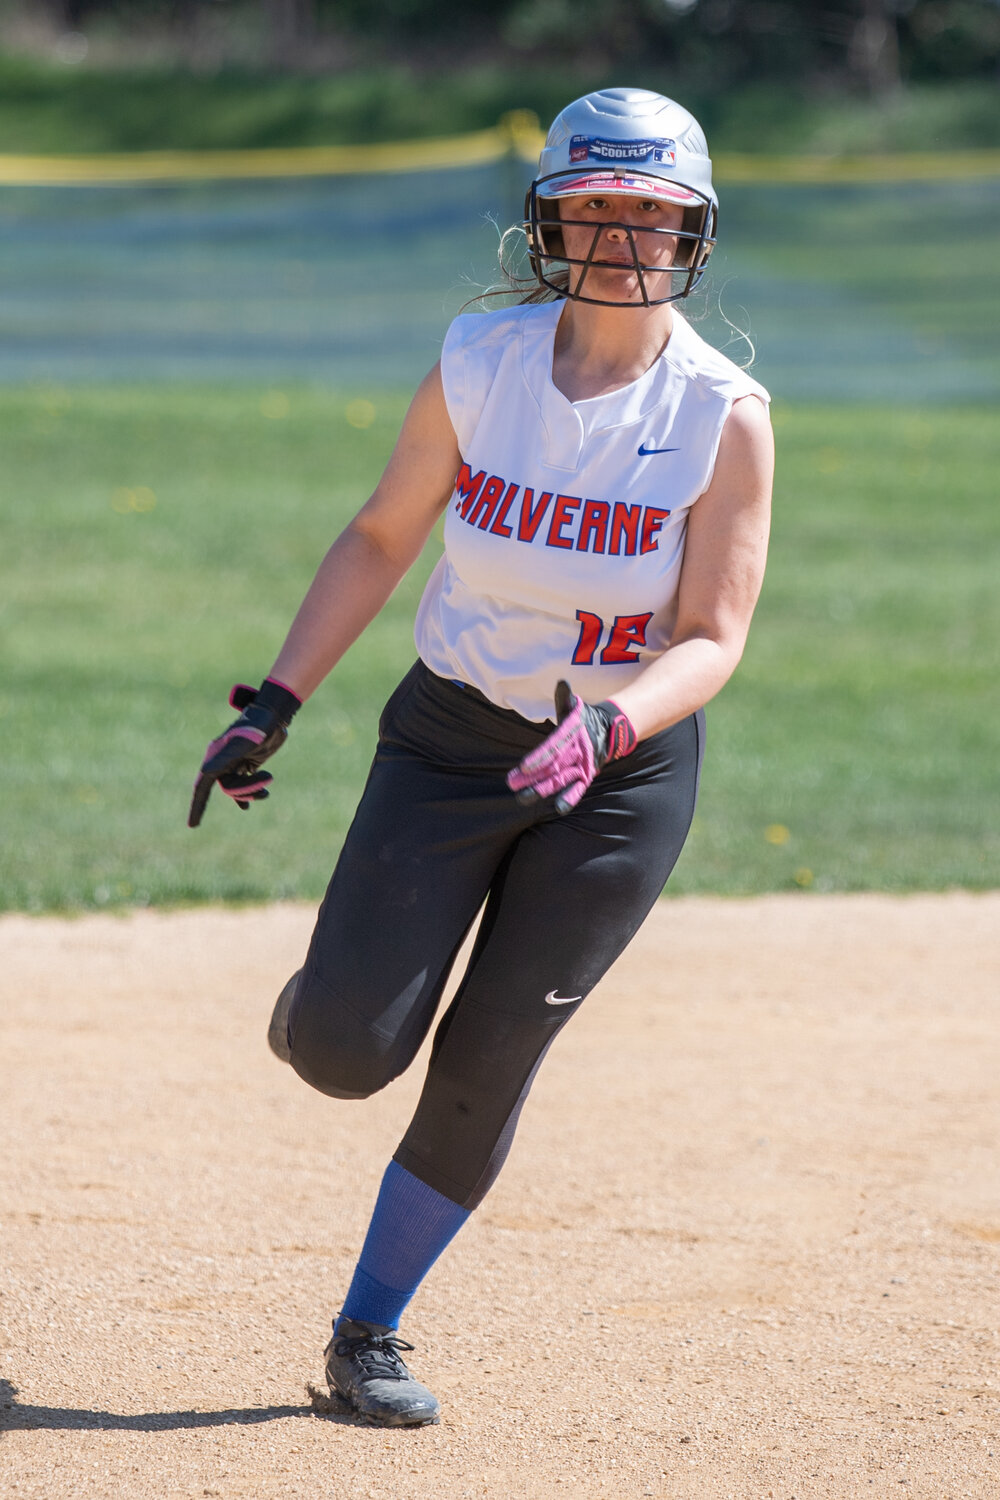 Samantha Frey cracked a two-rum homer in the second inning to help set the tone in Malverne’s big win over Valley Stream Central April 13.